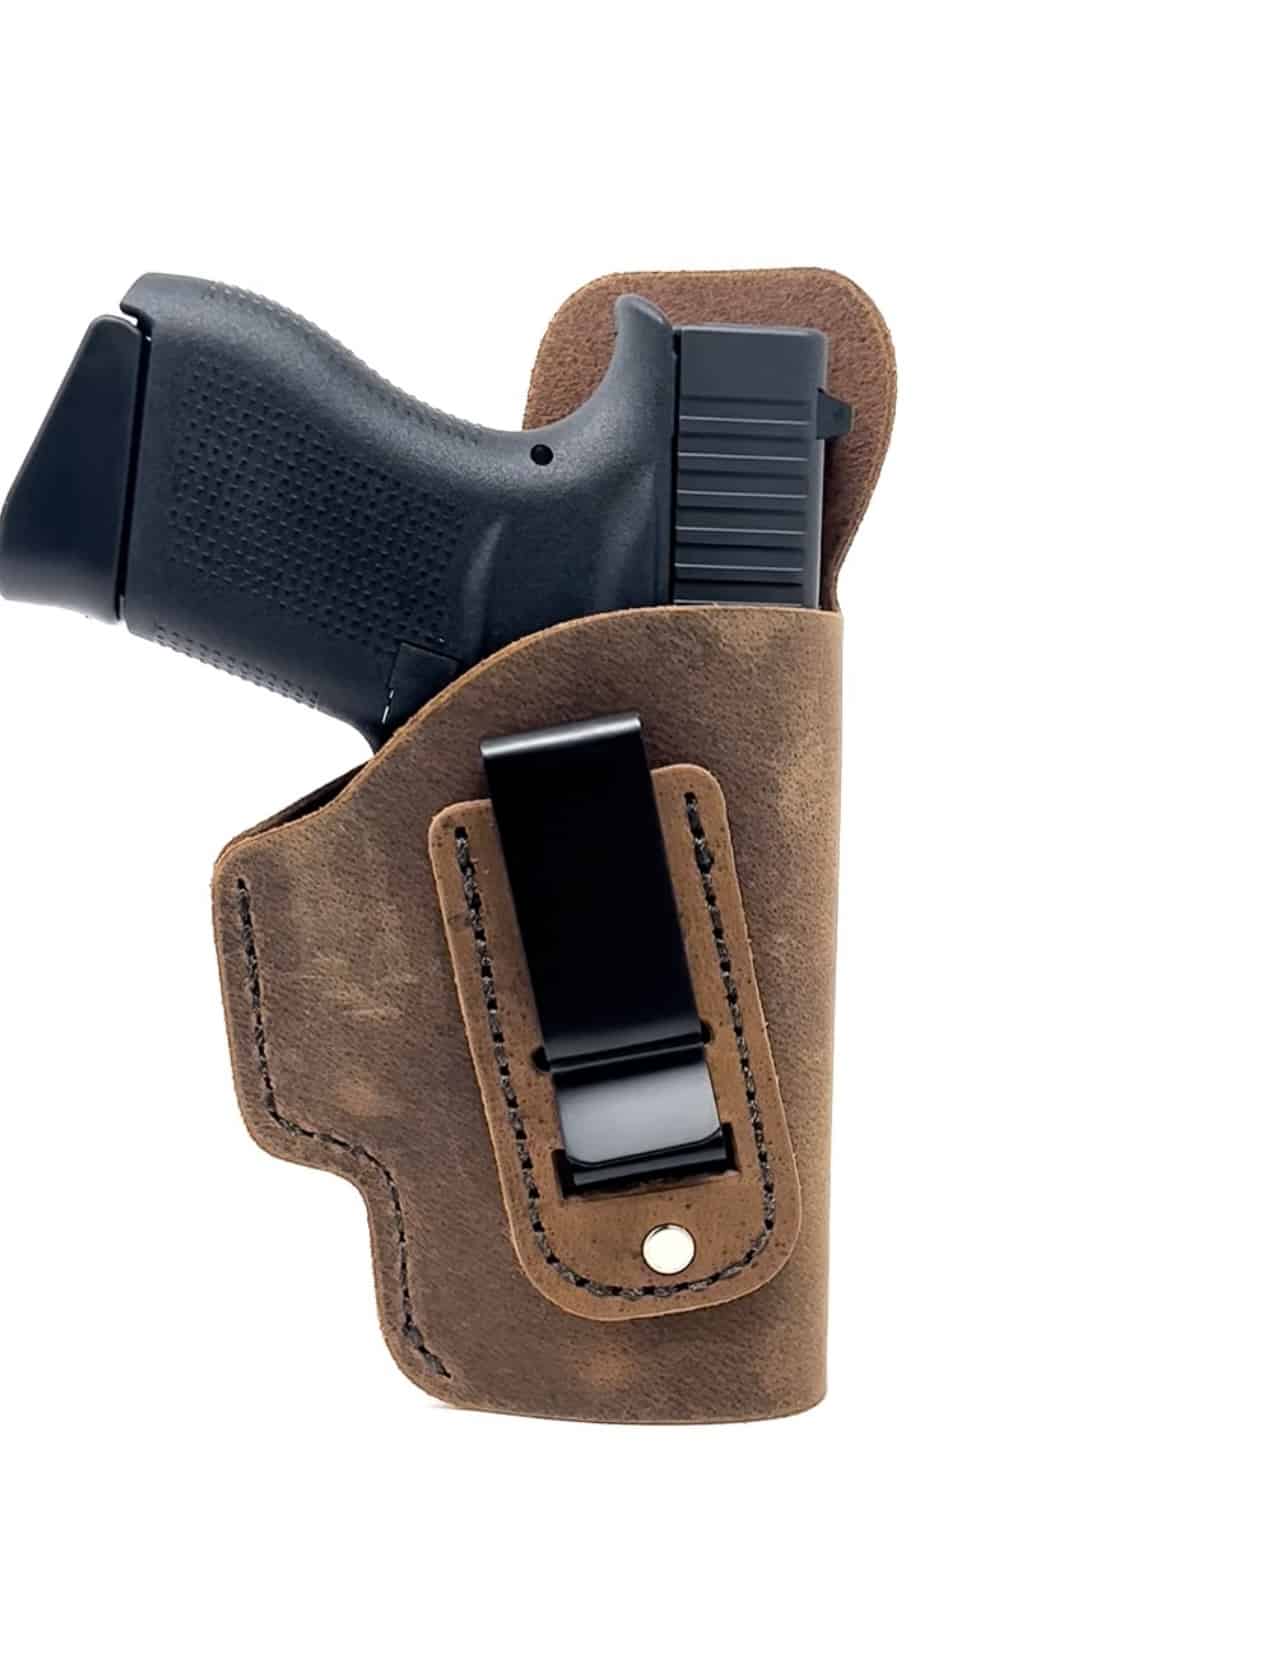 Leather IWB Concealed Carry Holster for Glock 17 19 26 43X 48 Pistol Gun Tactica 